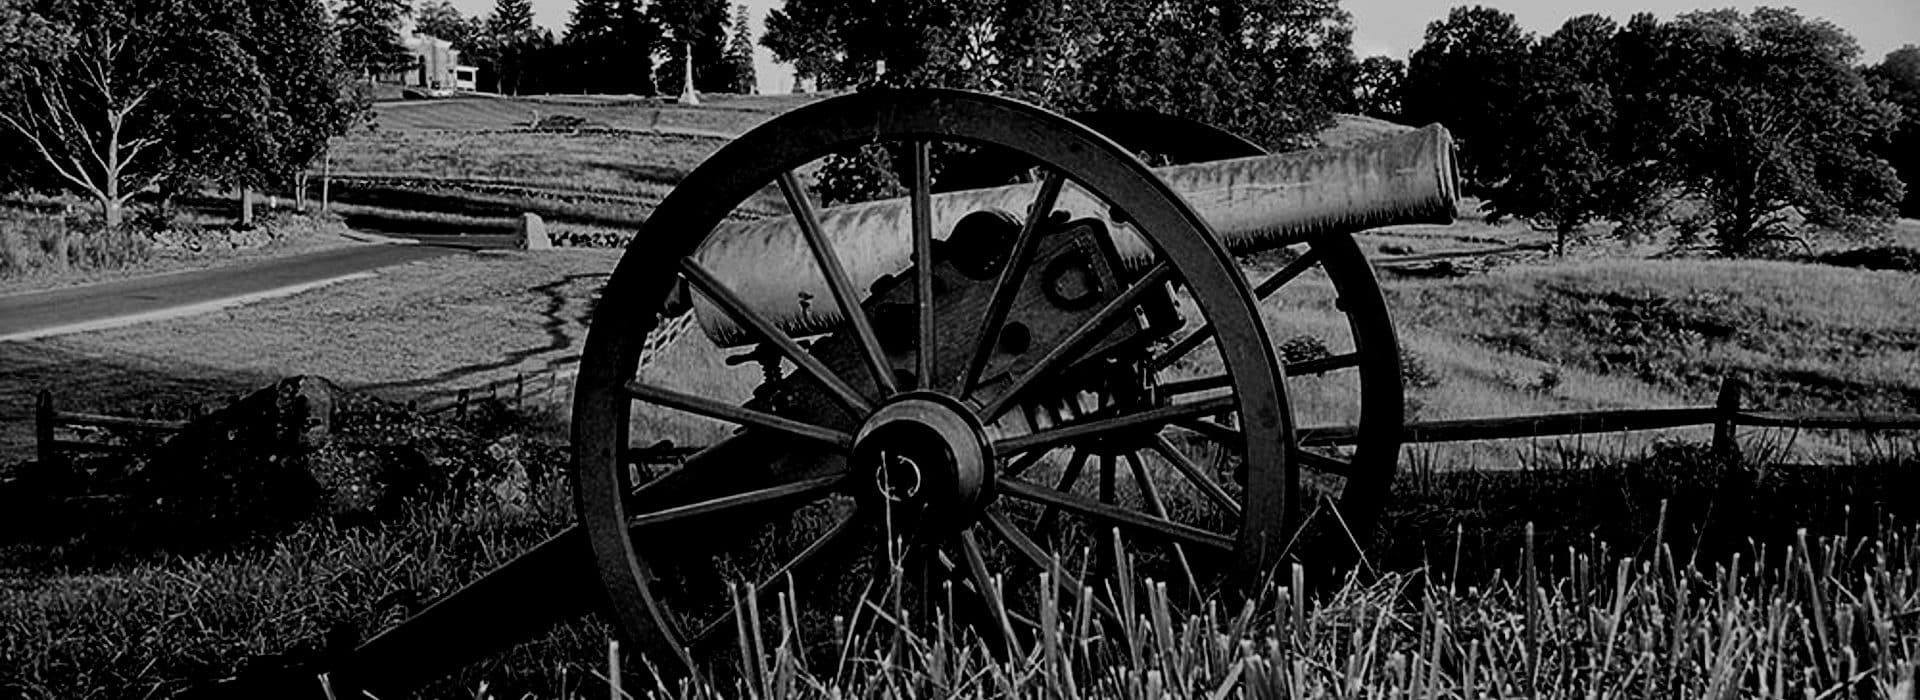 Old historic cannon in a field of green grass with farmland behind